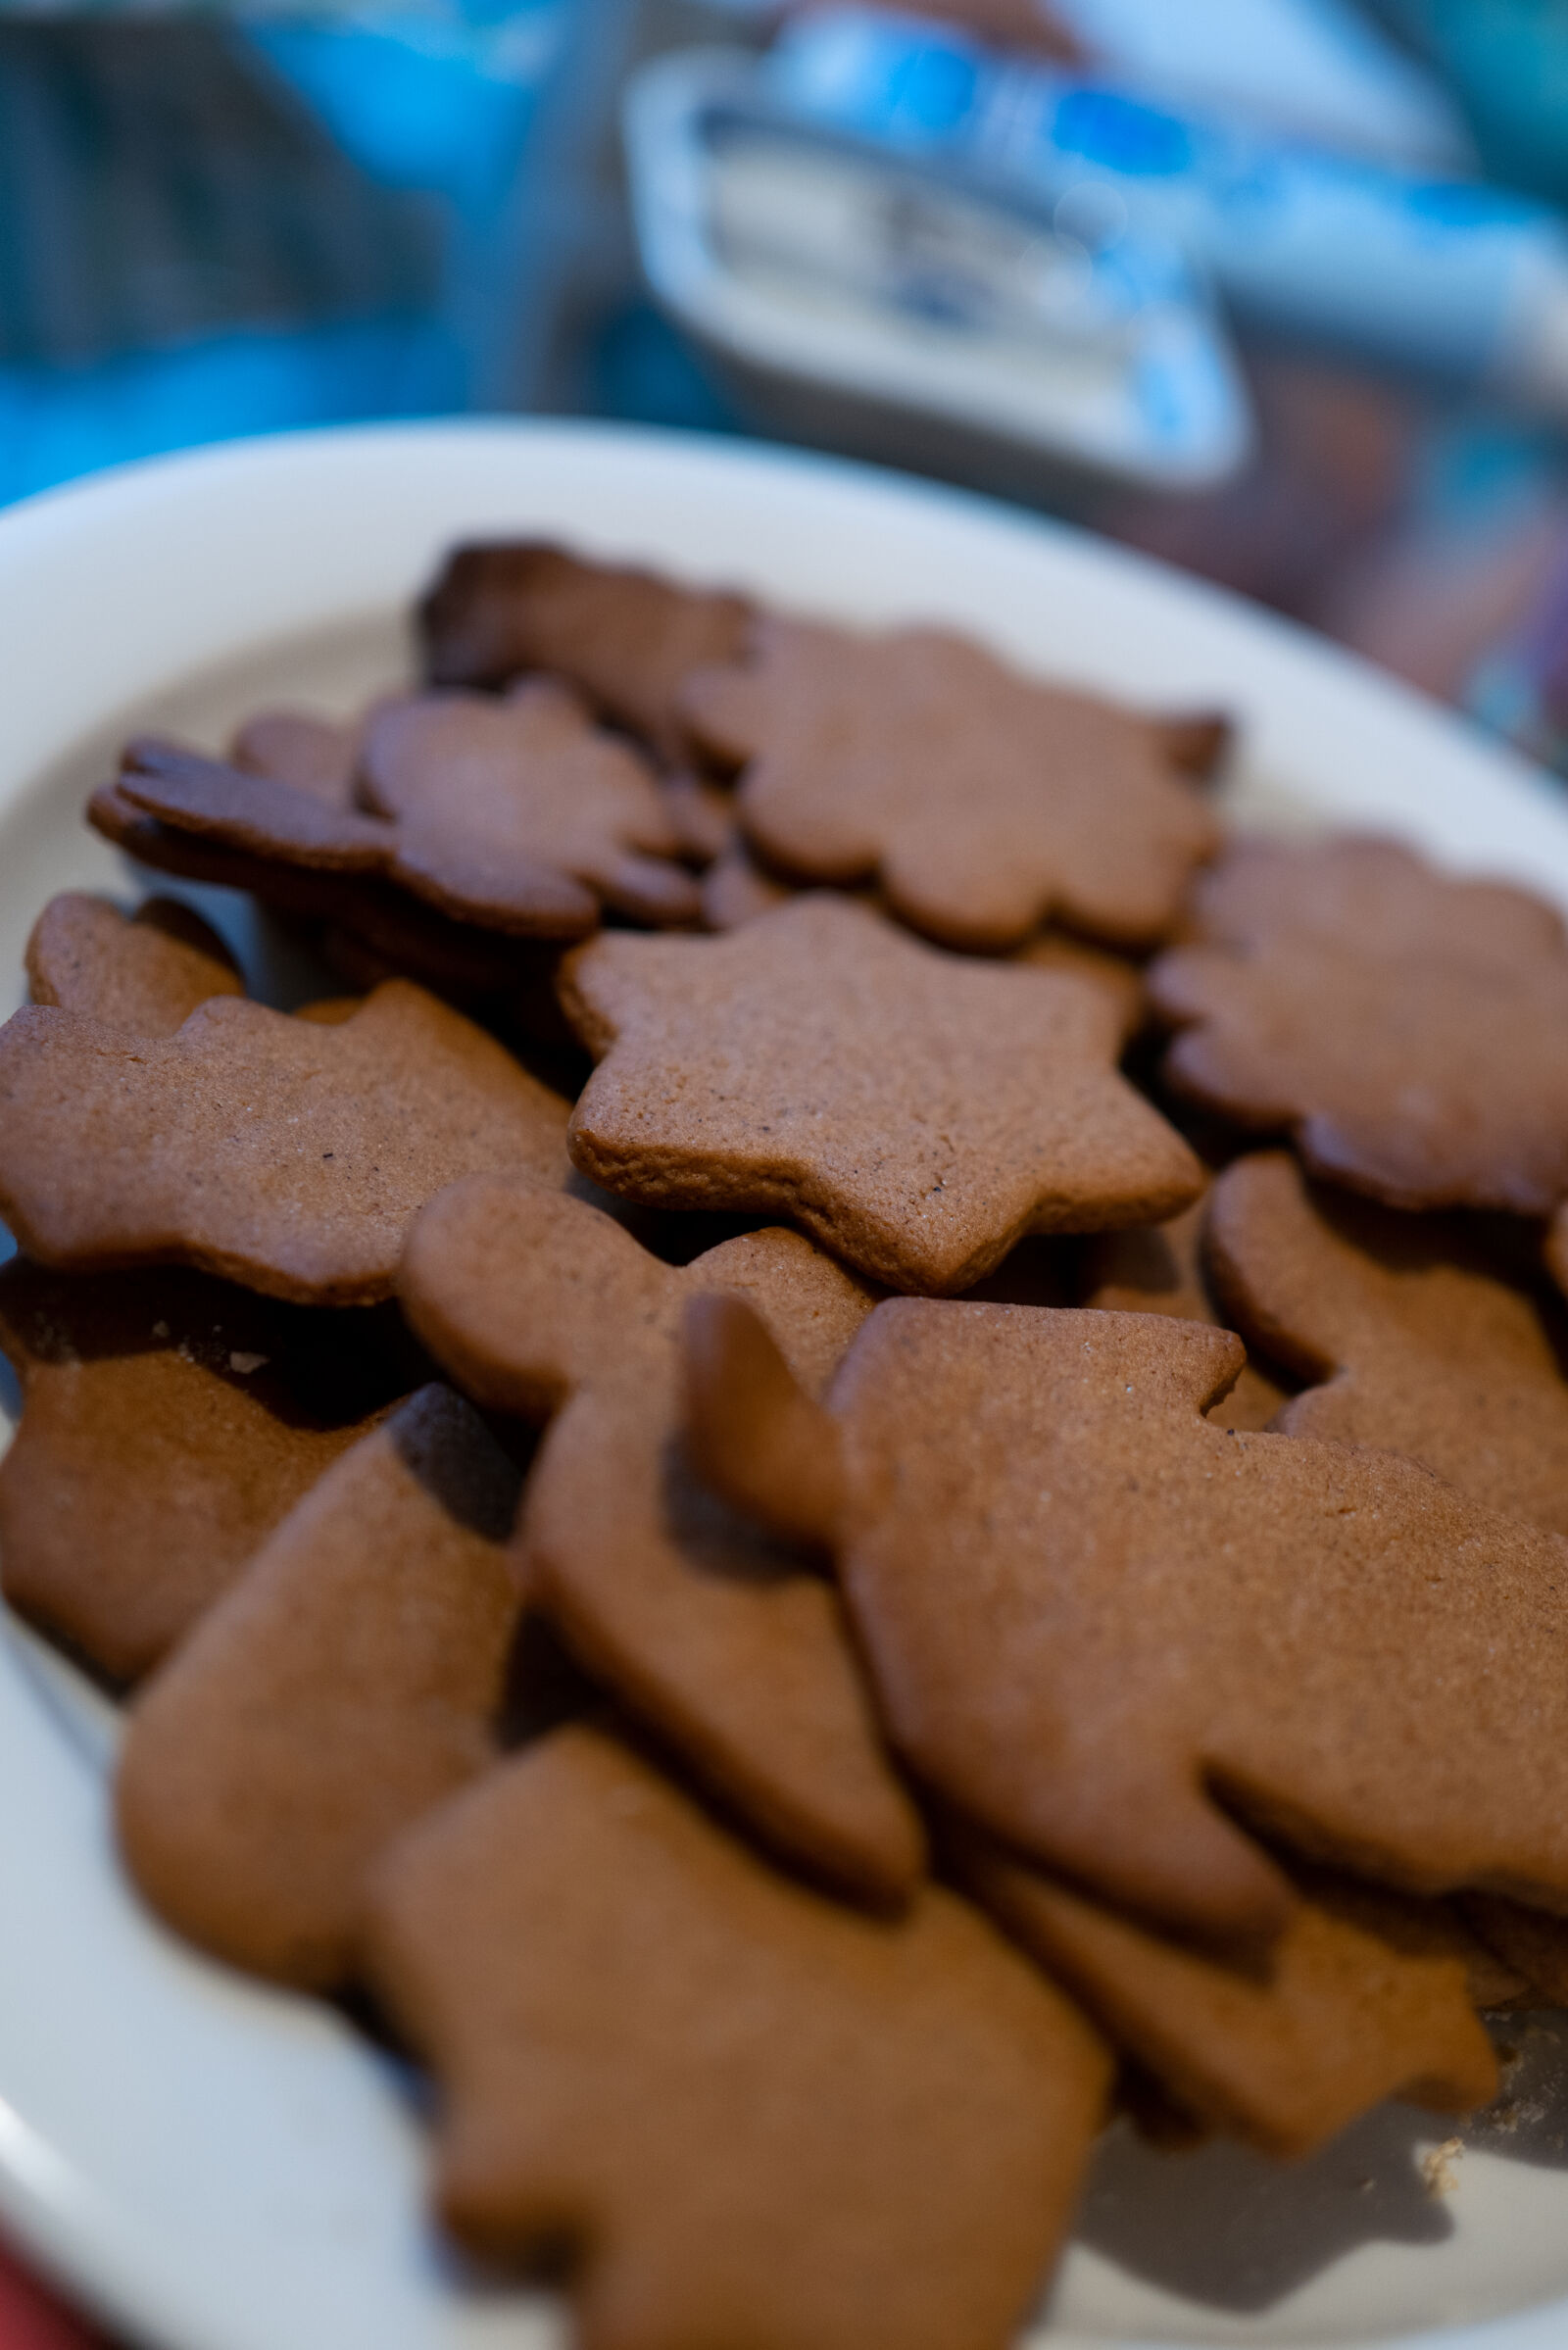 SUMMILUX 1:1.7/28 ASPH. sample photo. Bare gingerbreads photography